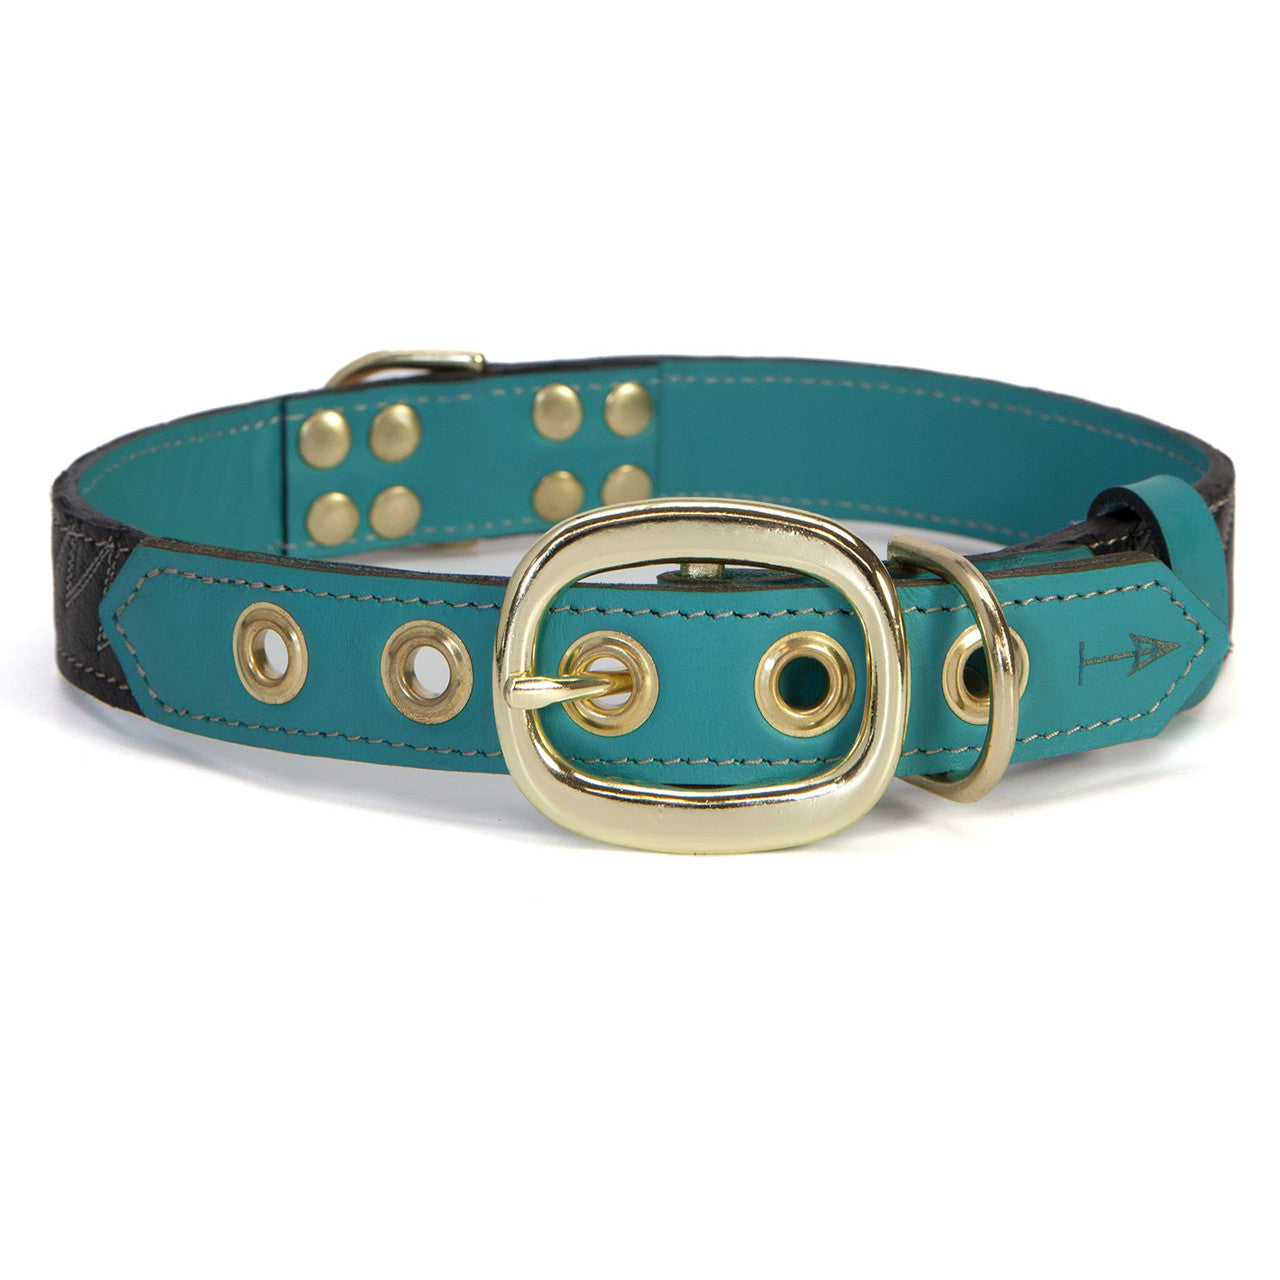 Turquoise Dog Collar with Black Leather + White Spike Stitching (back view)